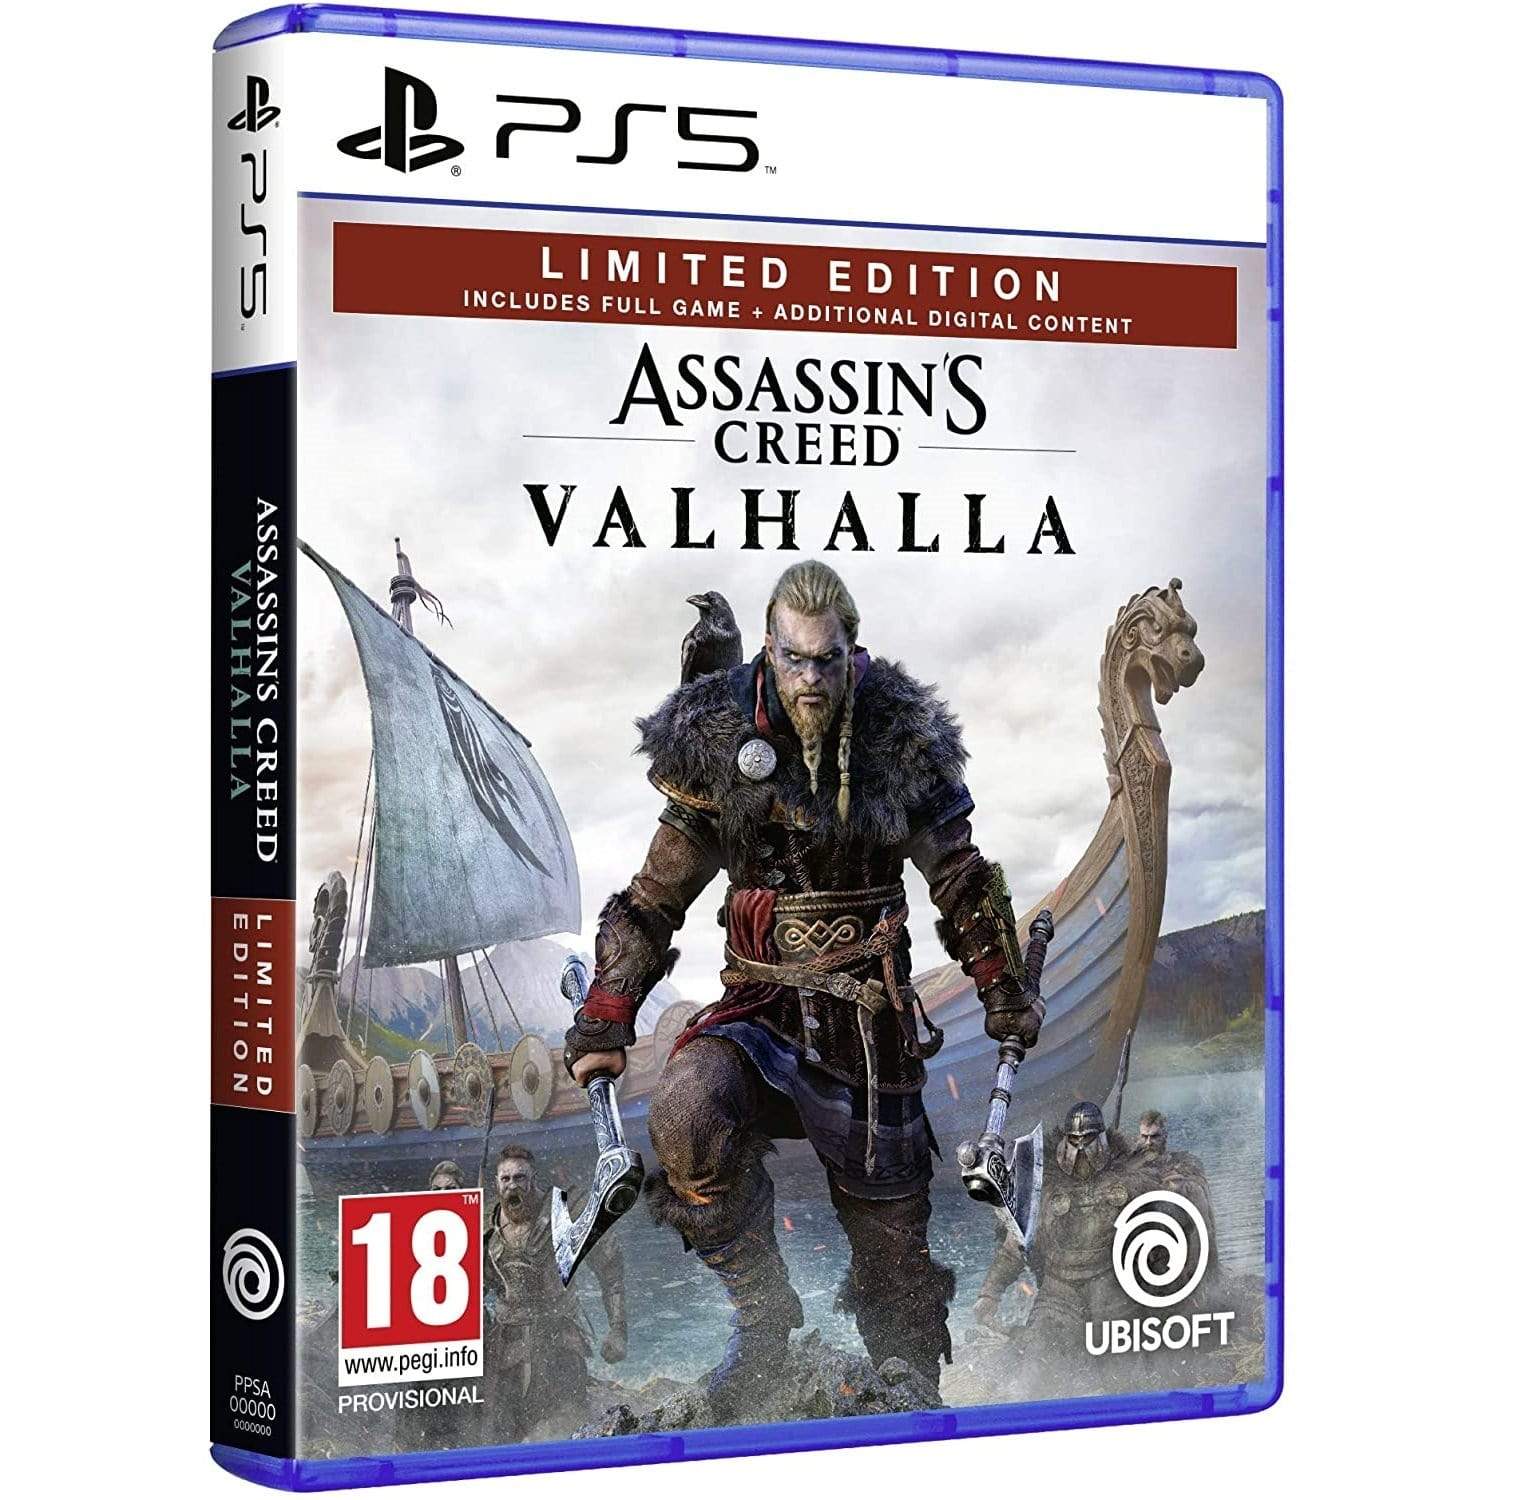 Ubisoft ps5. Assassin's Creed Valhalla ps4 & ps5. Ассасин Вальгалла пс5. Ассасин Вальгалла пс5 диск. Ассасин Крид Вальгалла PLAYSTATION 5.